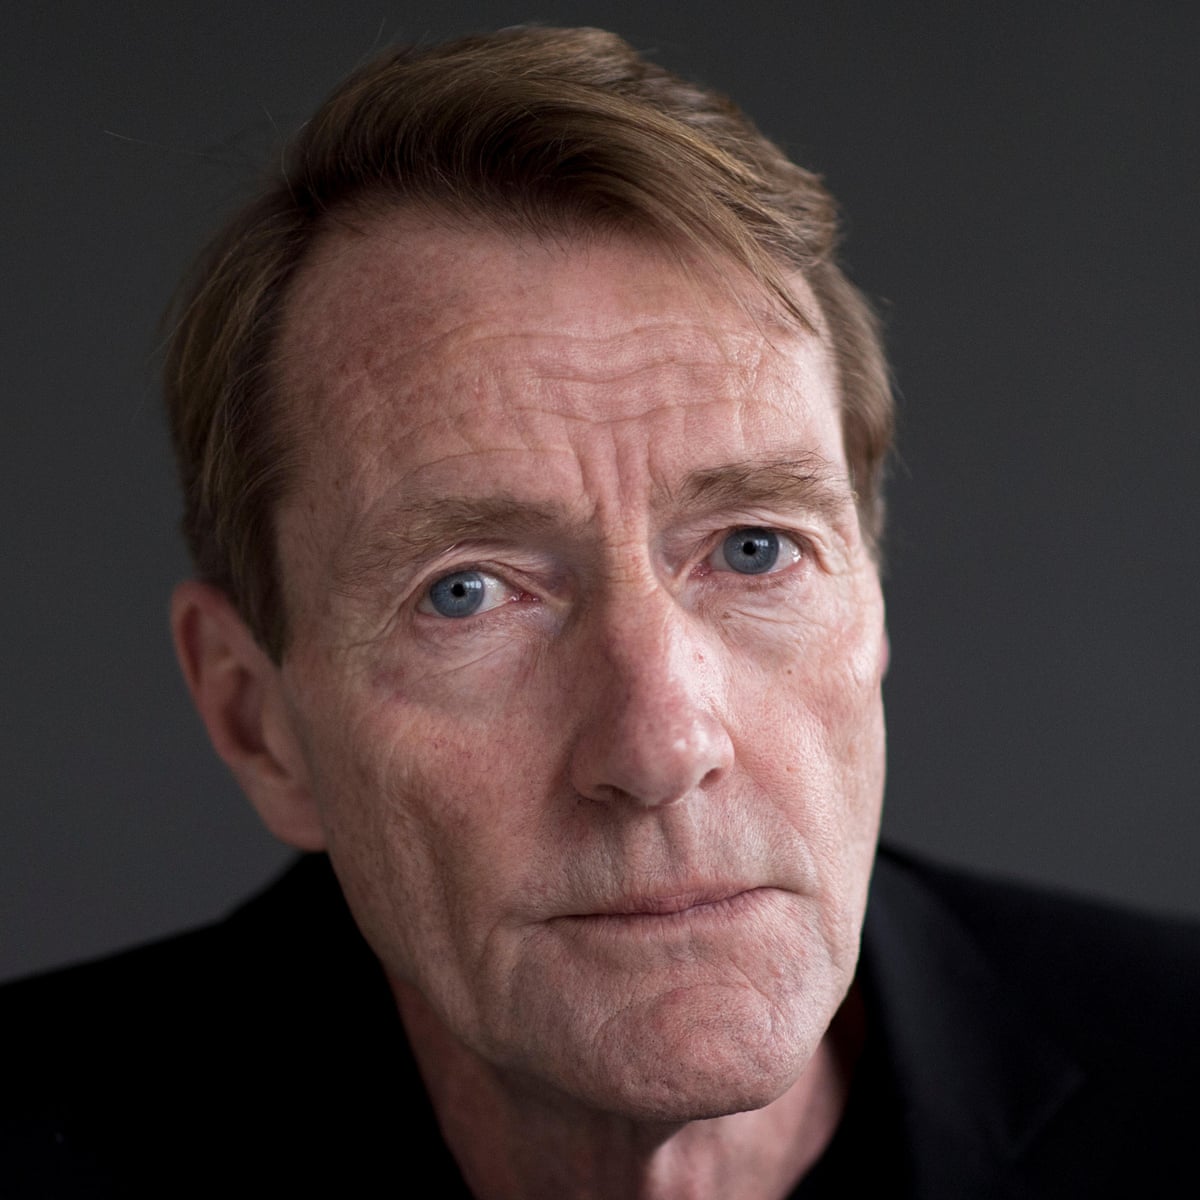 Lee Child on Jack Reacher: 'I don't like him that much' | Crime fiction |  The Guardian